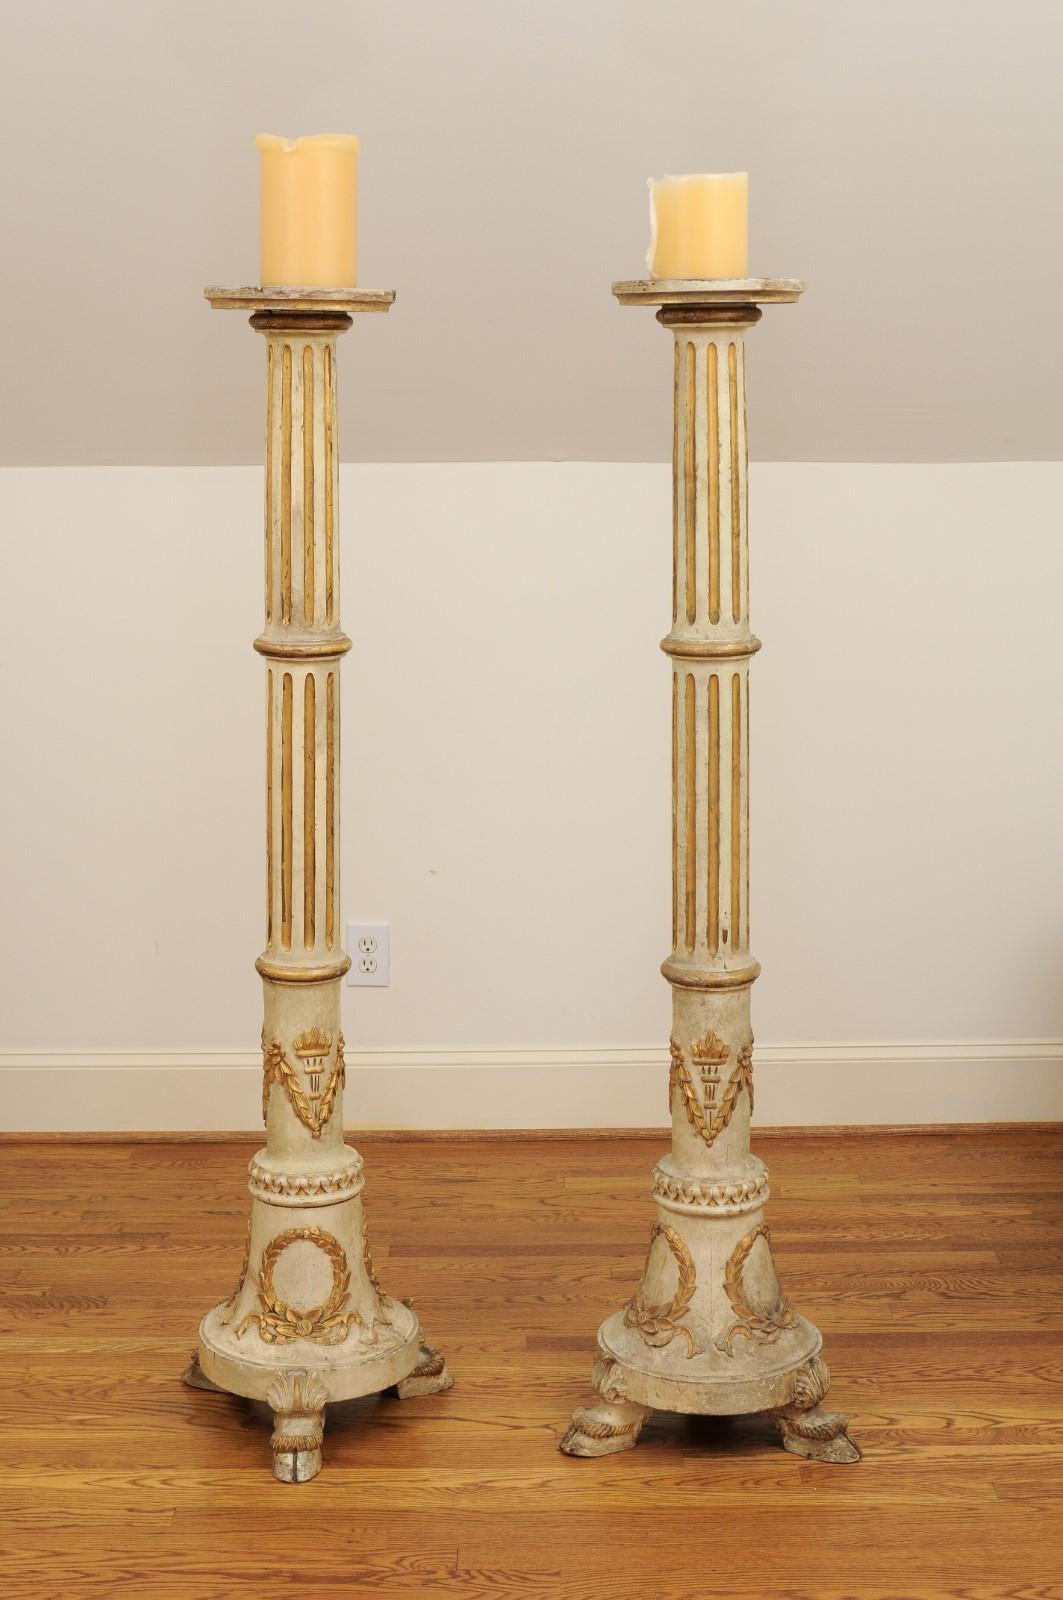 Pair of Tall French Napoléon III 1860s Candlesticks with Carved Gilt Motifs For Sale 2